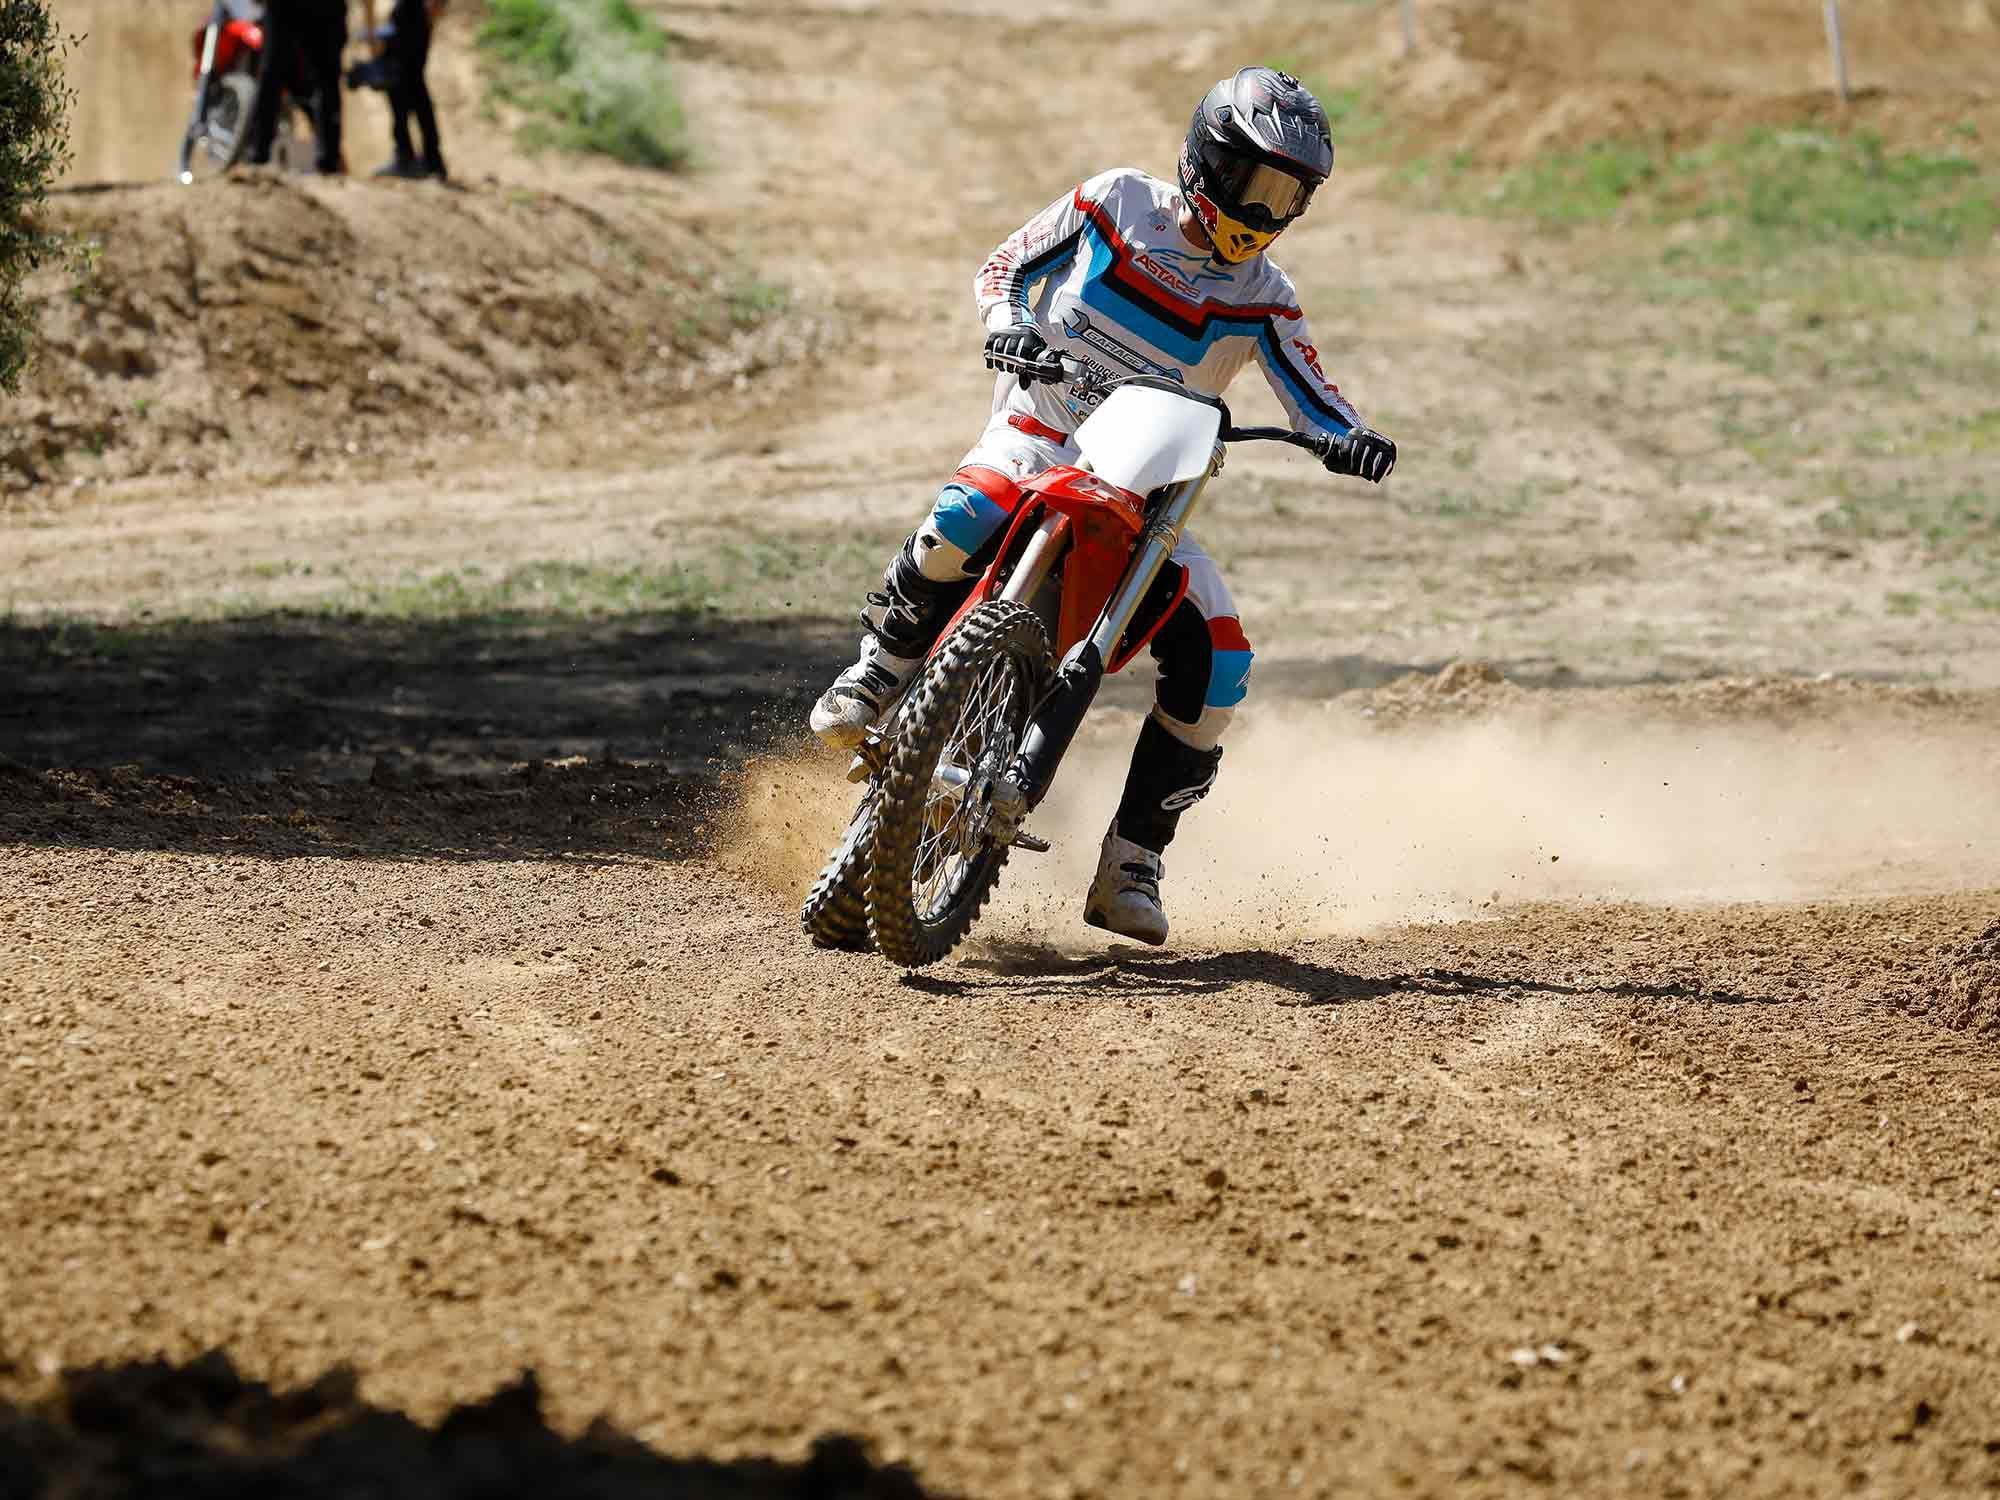 The sweeping left-hander at MX Golf has me thinking about the look of the Varg on 19s as a DTX-style flat-track bike.